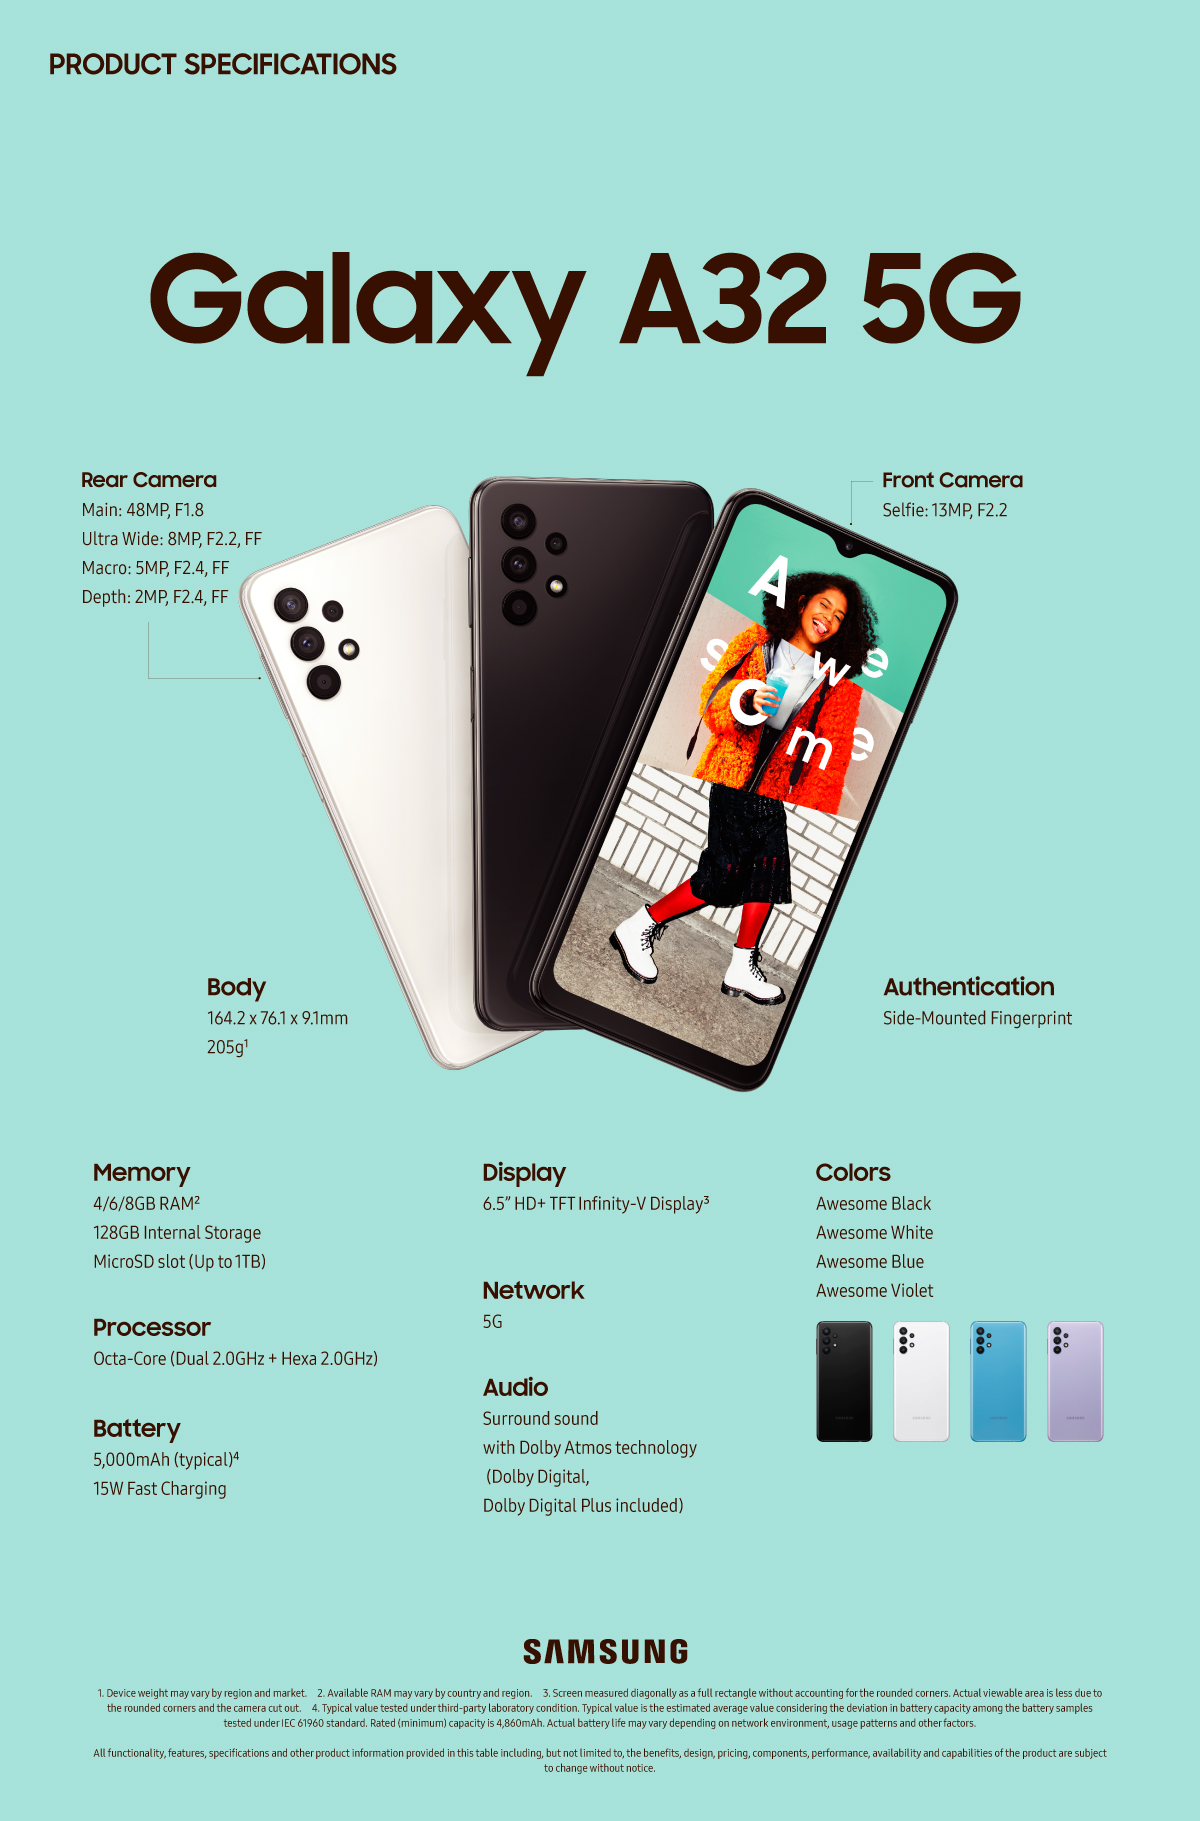 Specs] Galaxy A32 5G Delivers Awesome Power in an Iconic Design